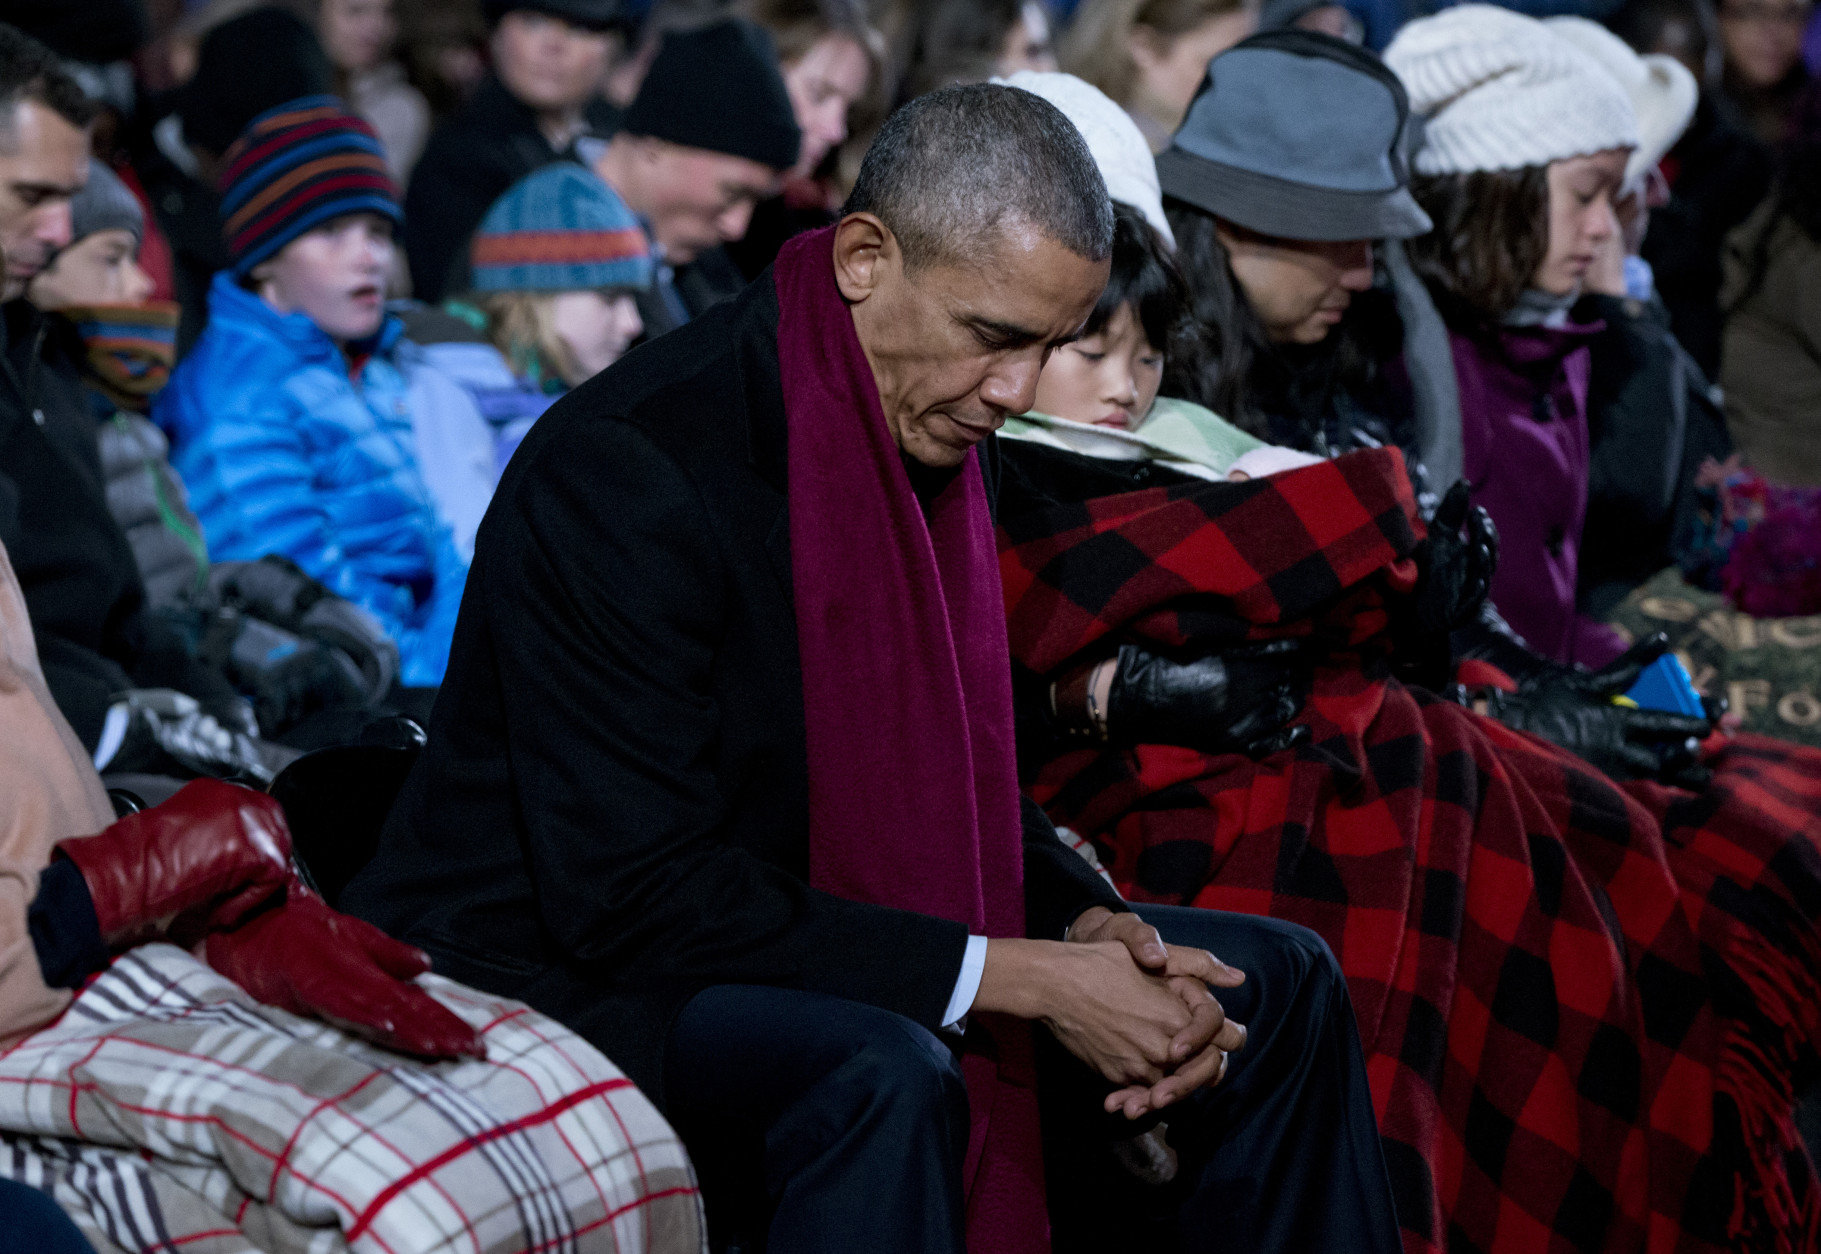 President Barack Obama bows his head in prayer during the National Christmas Tree Lighting ceremony at the Ellipse in Washington, Thursday, Dec. 3, 2015. (AP Photo/Carolyn Kaster)